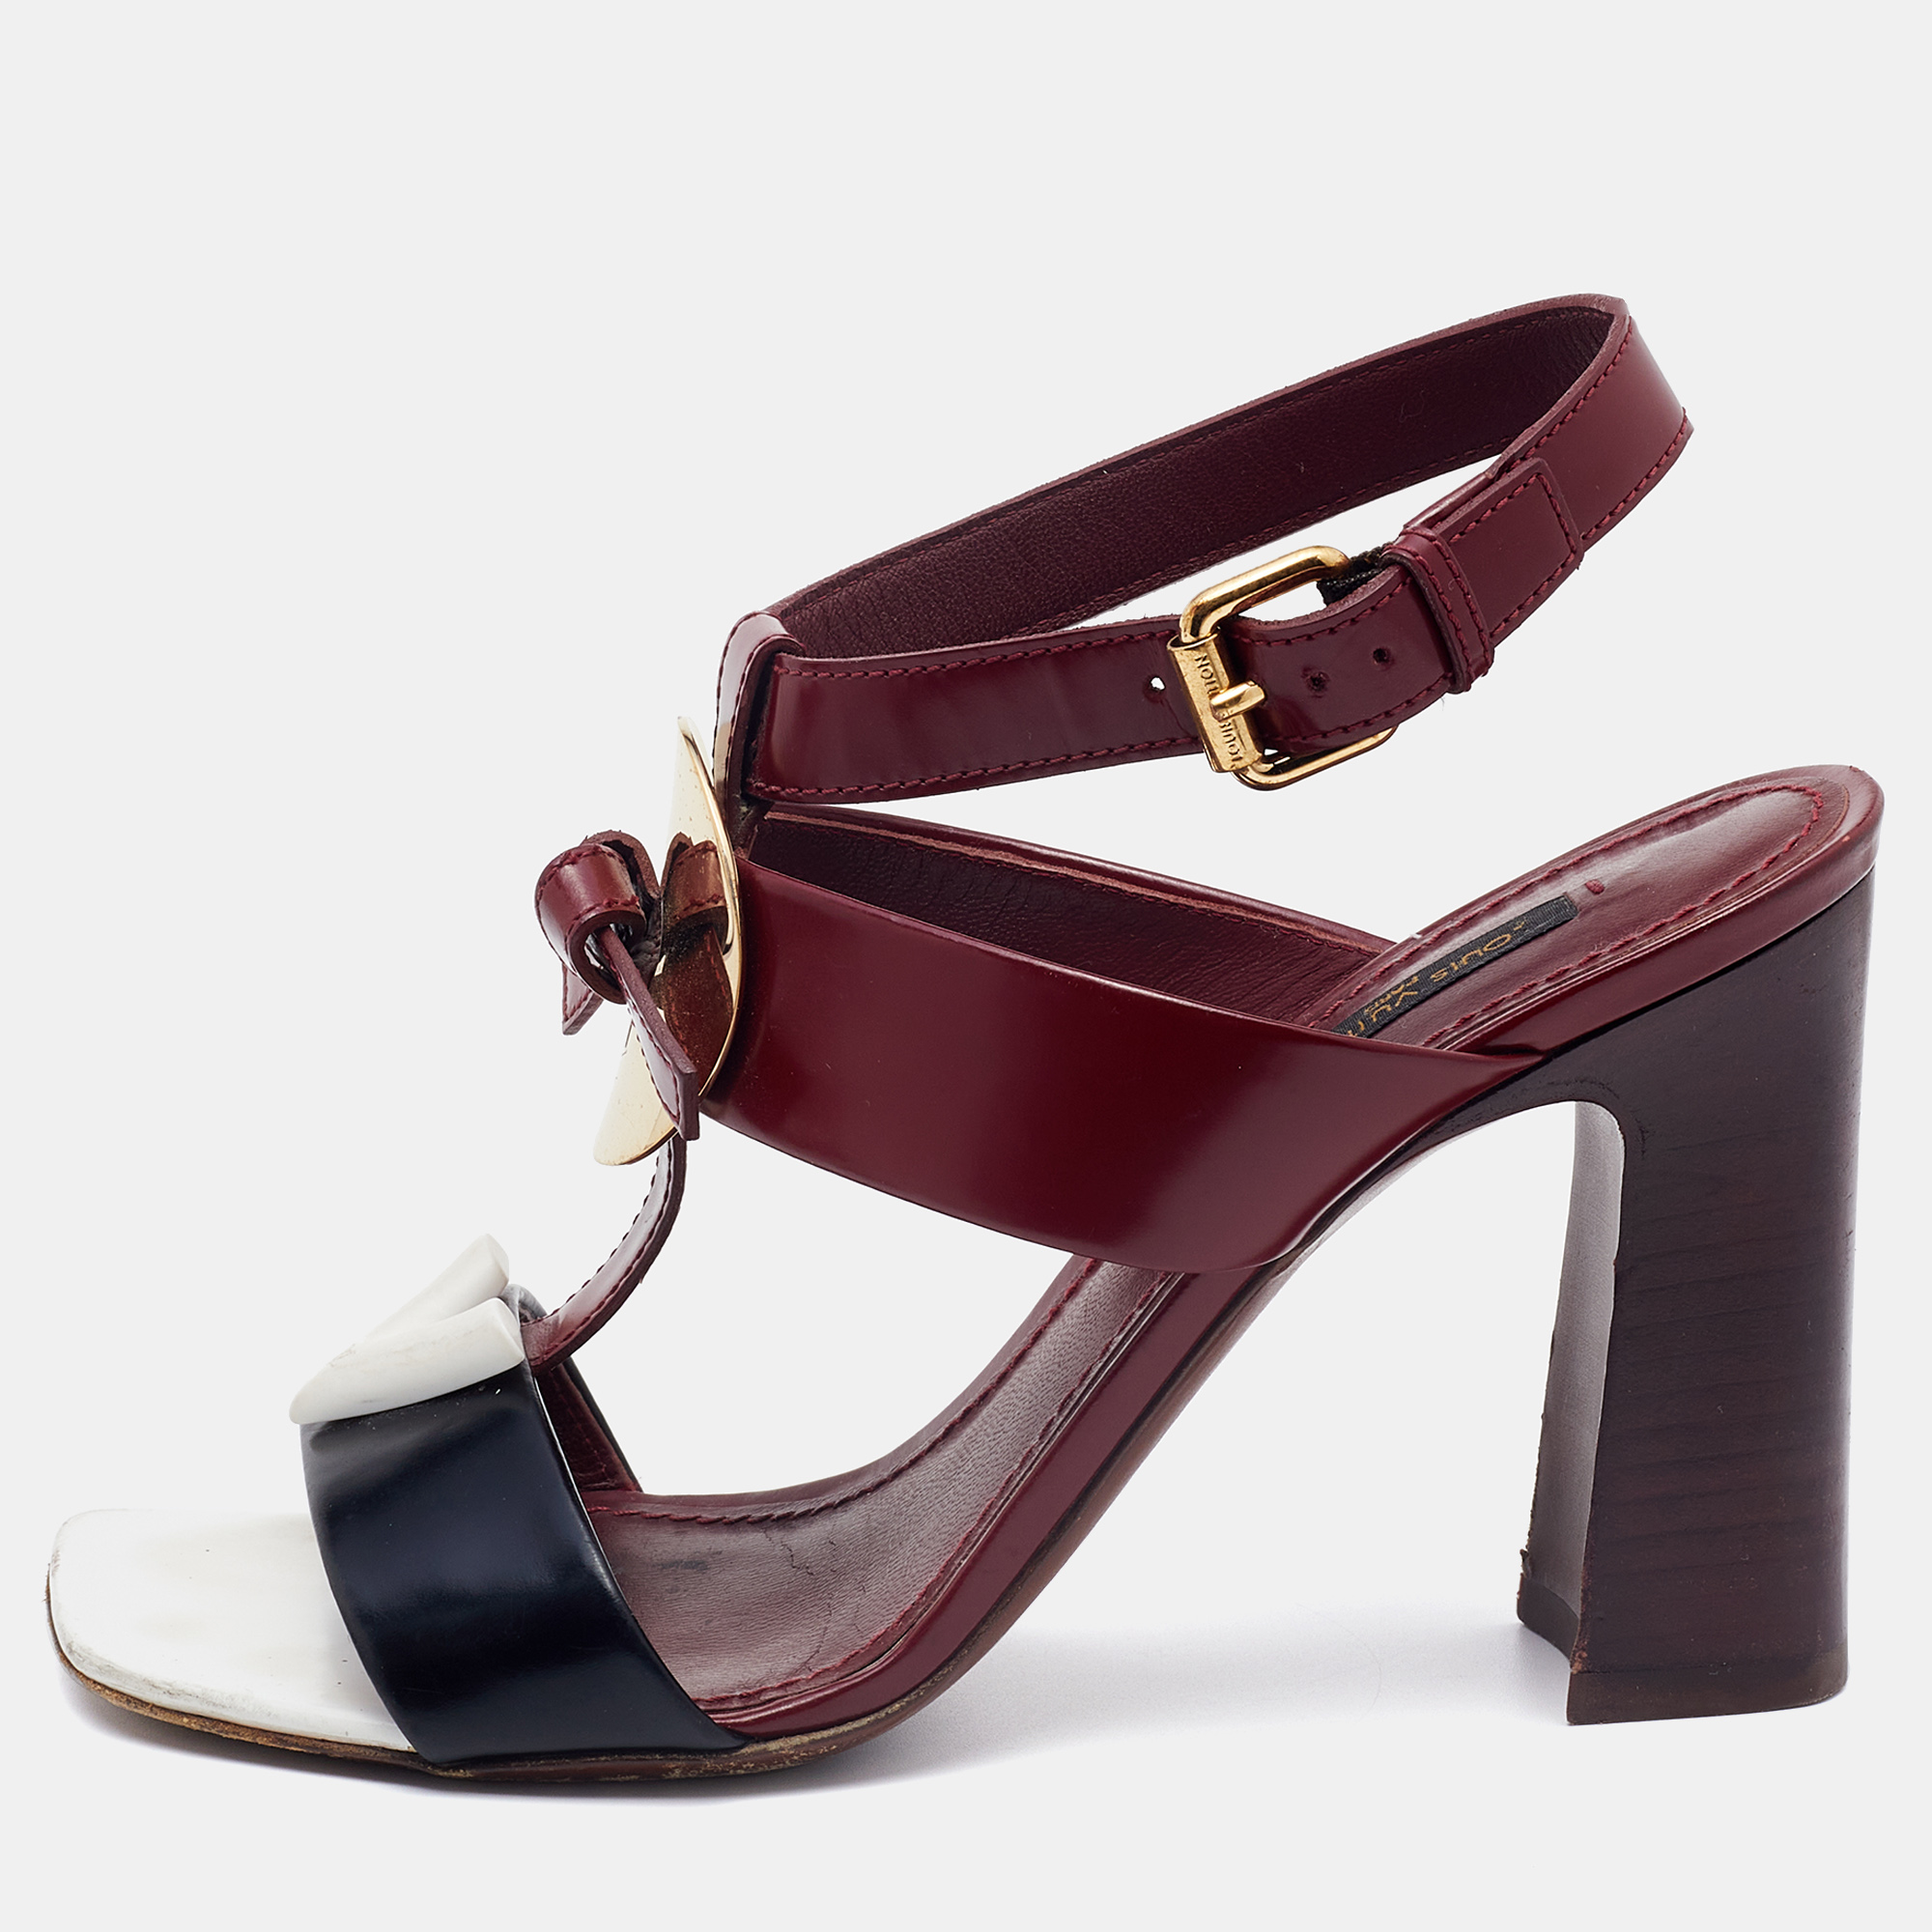 Pre-owned Louis Vuitton Burgundy/black Leather Ankle Strap Sandals Size 37